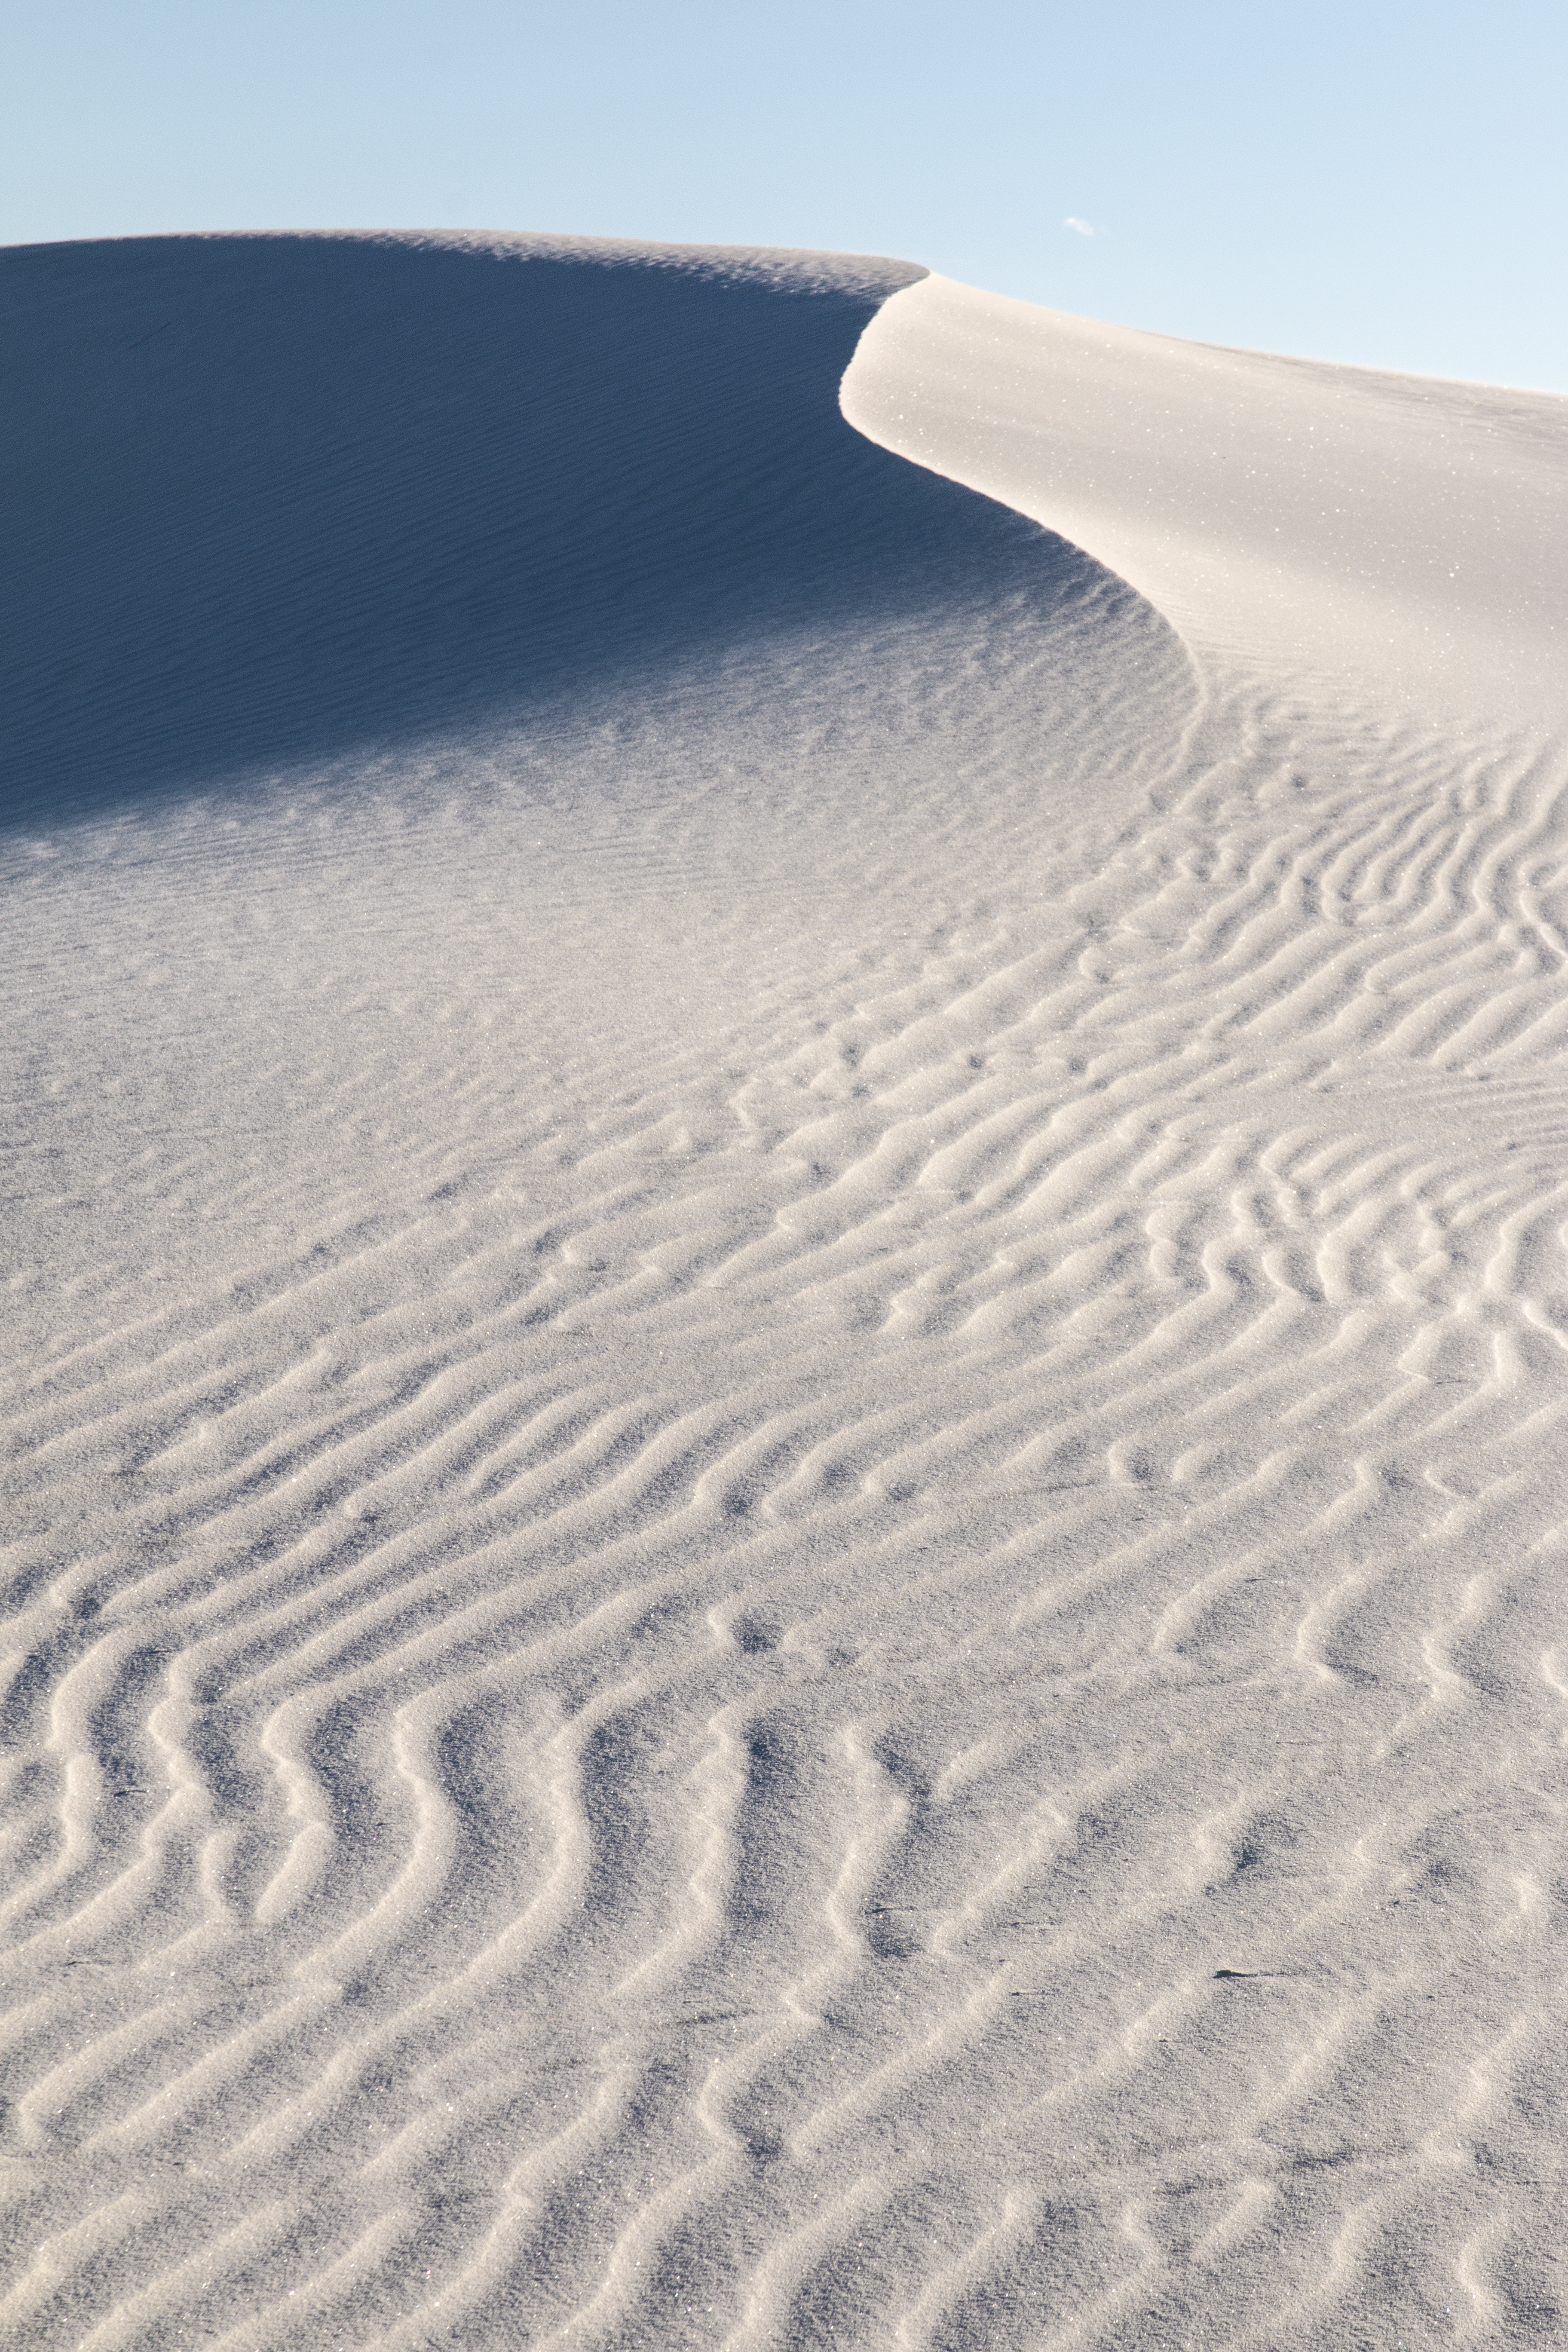 Close up view of ripples on a dune.